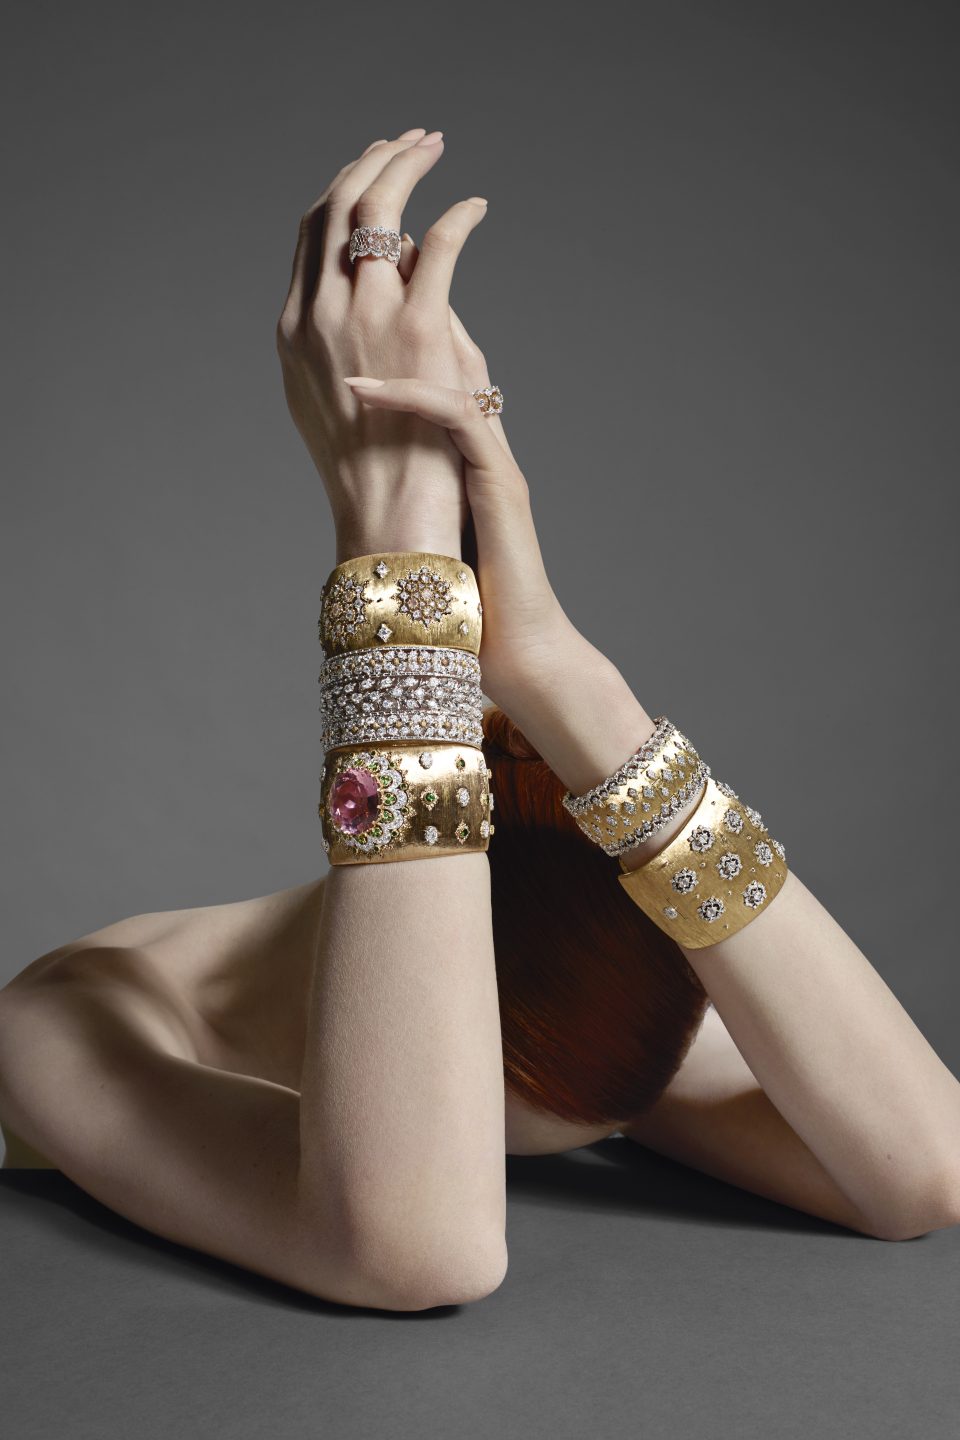 See Why Buccellati’s Intricate Jewels Have Been Coveted for More Than a Century